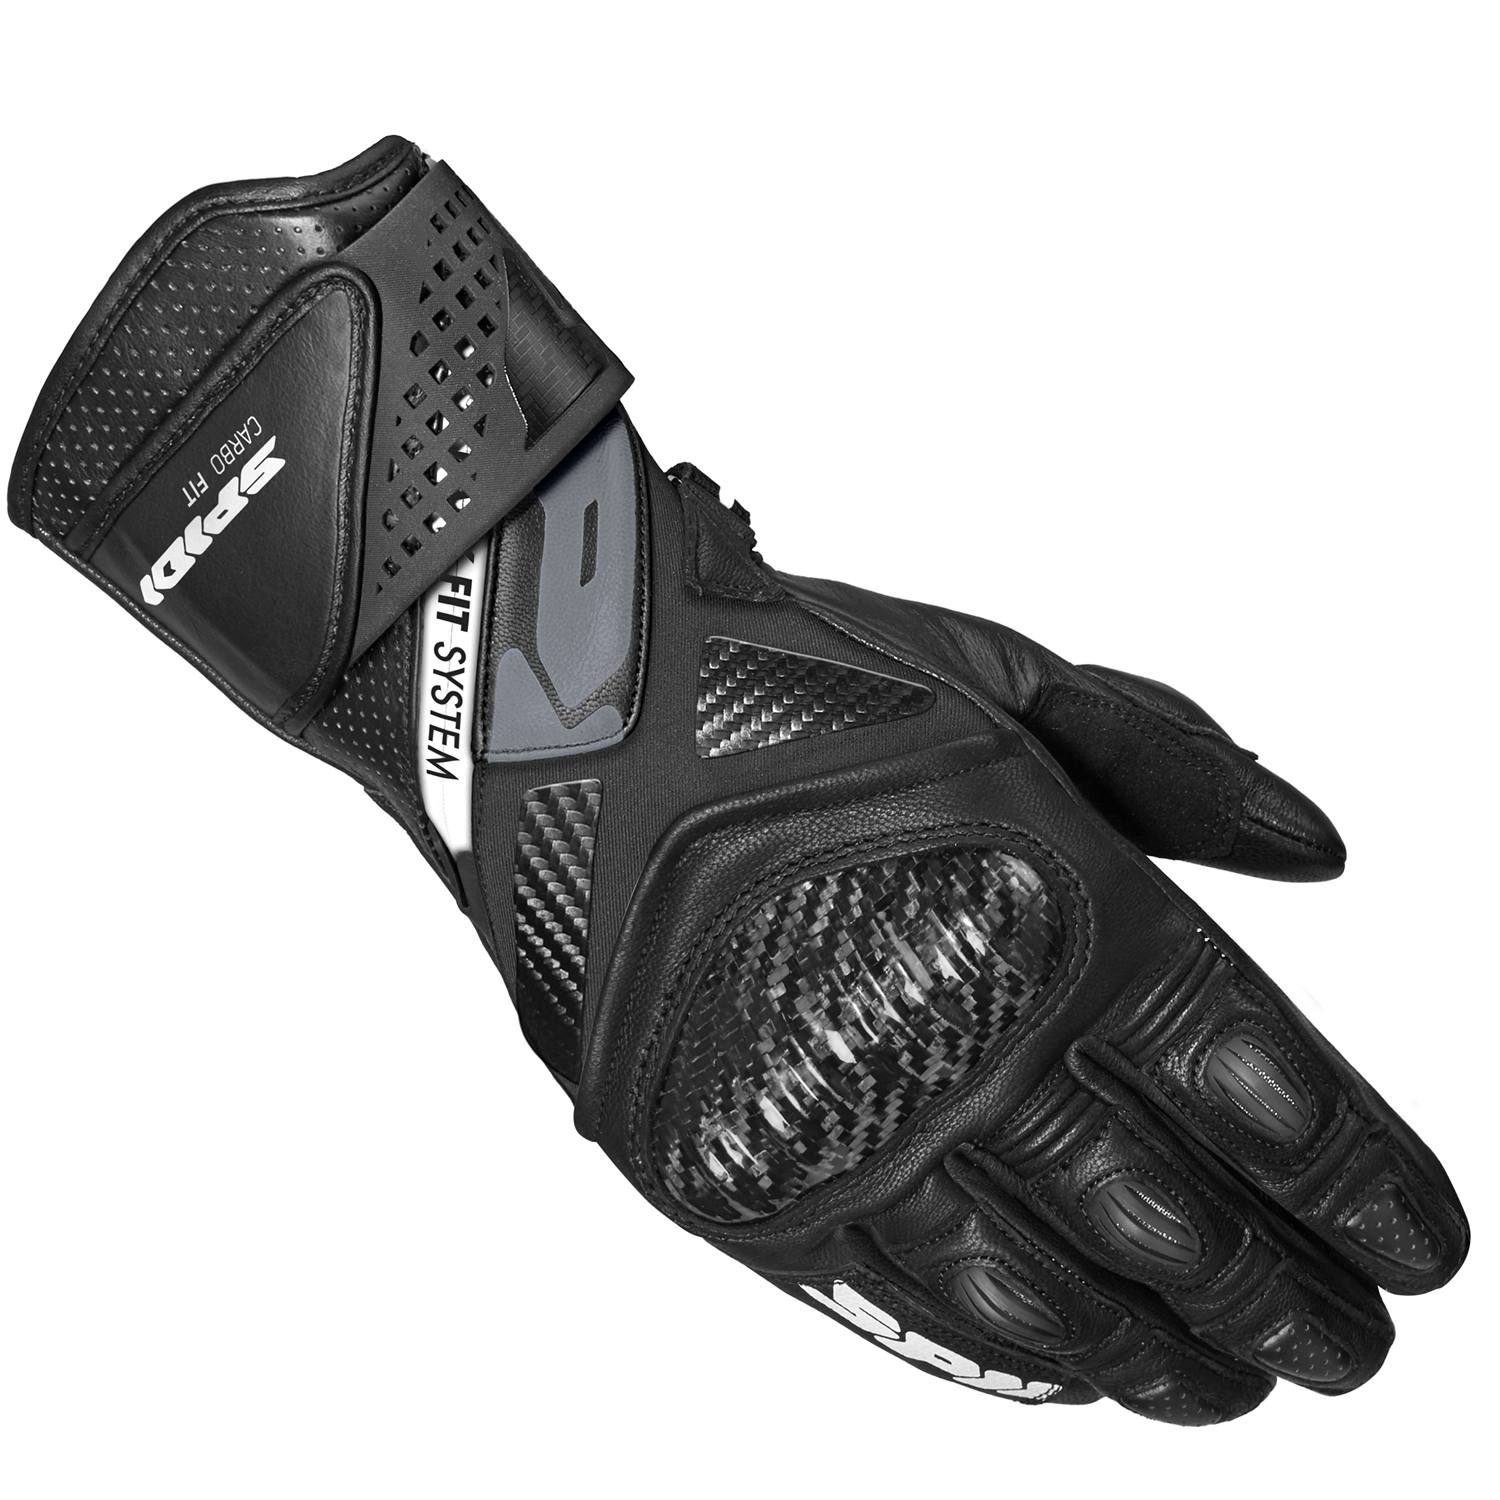 Image of EU Spidi Carbo Fit Gloves Black Taille 2XL